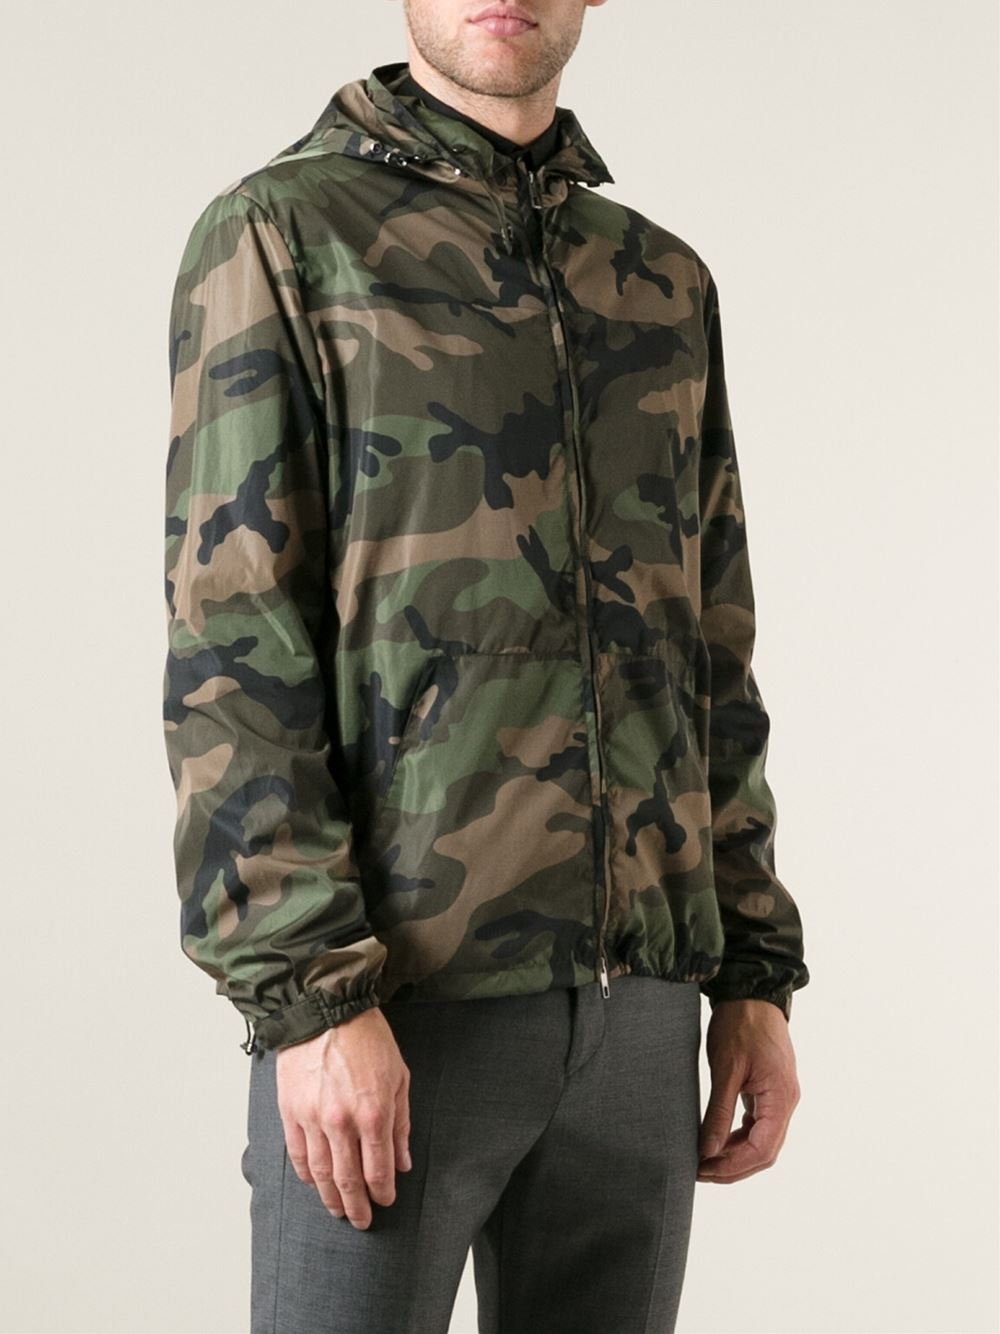 Lyst - Valentino Camouflage Jacket in Green for Men